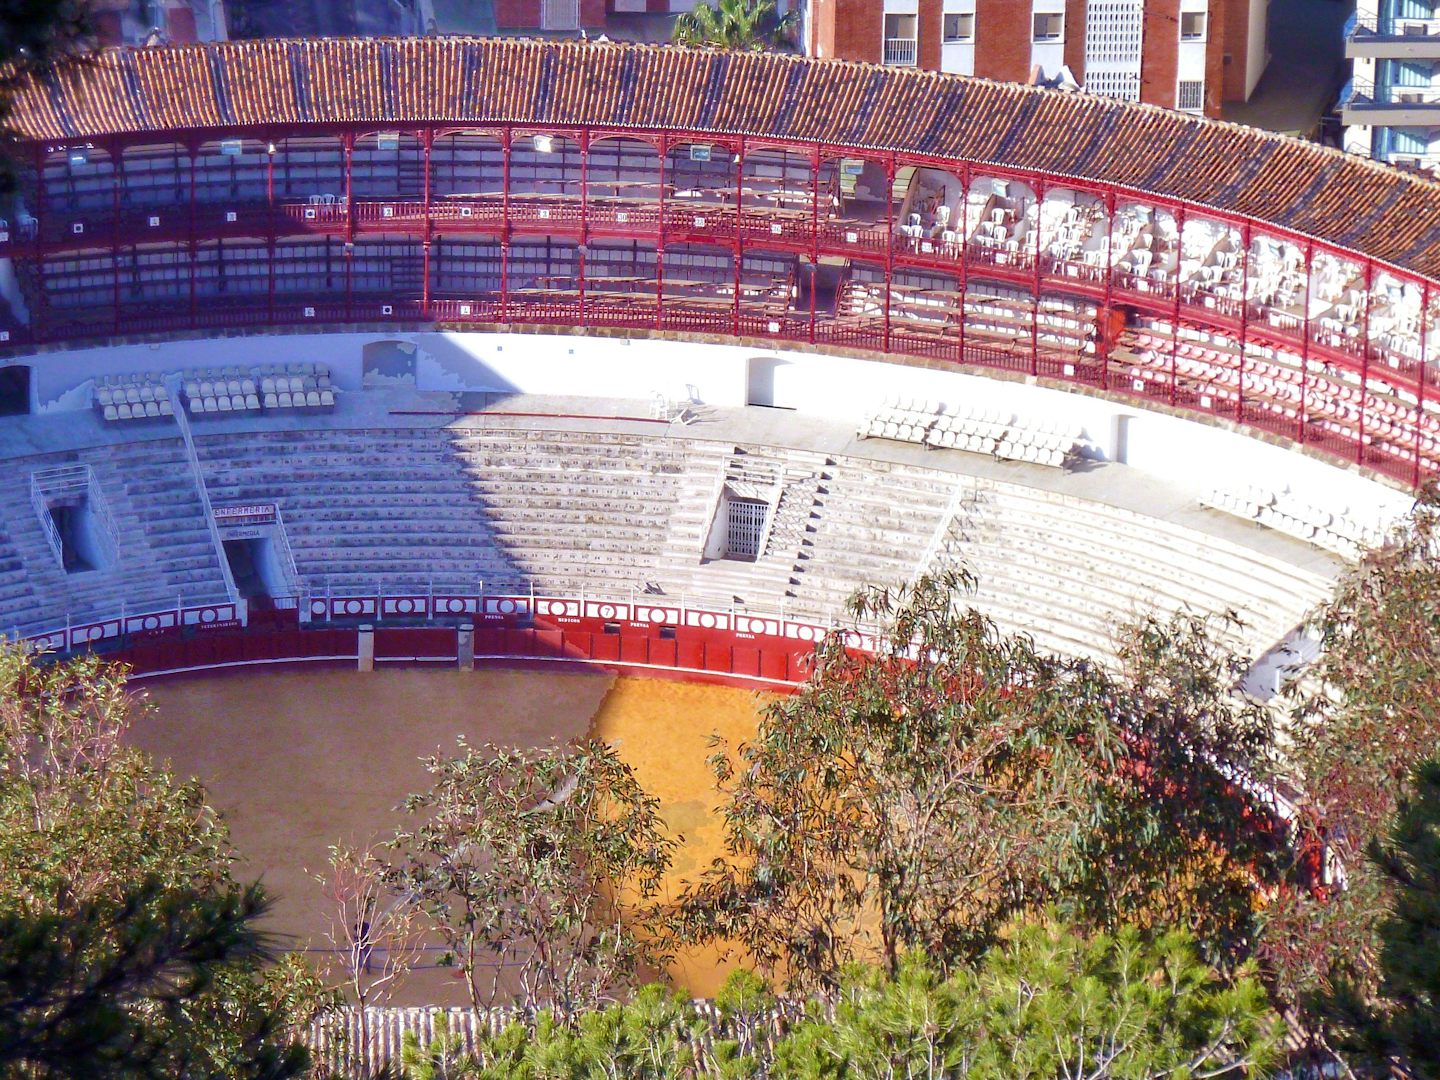 Bull ring - Malaga, Spain They are eliminating bull rings and making them i